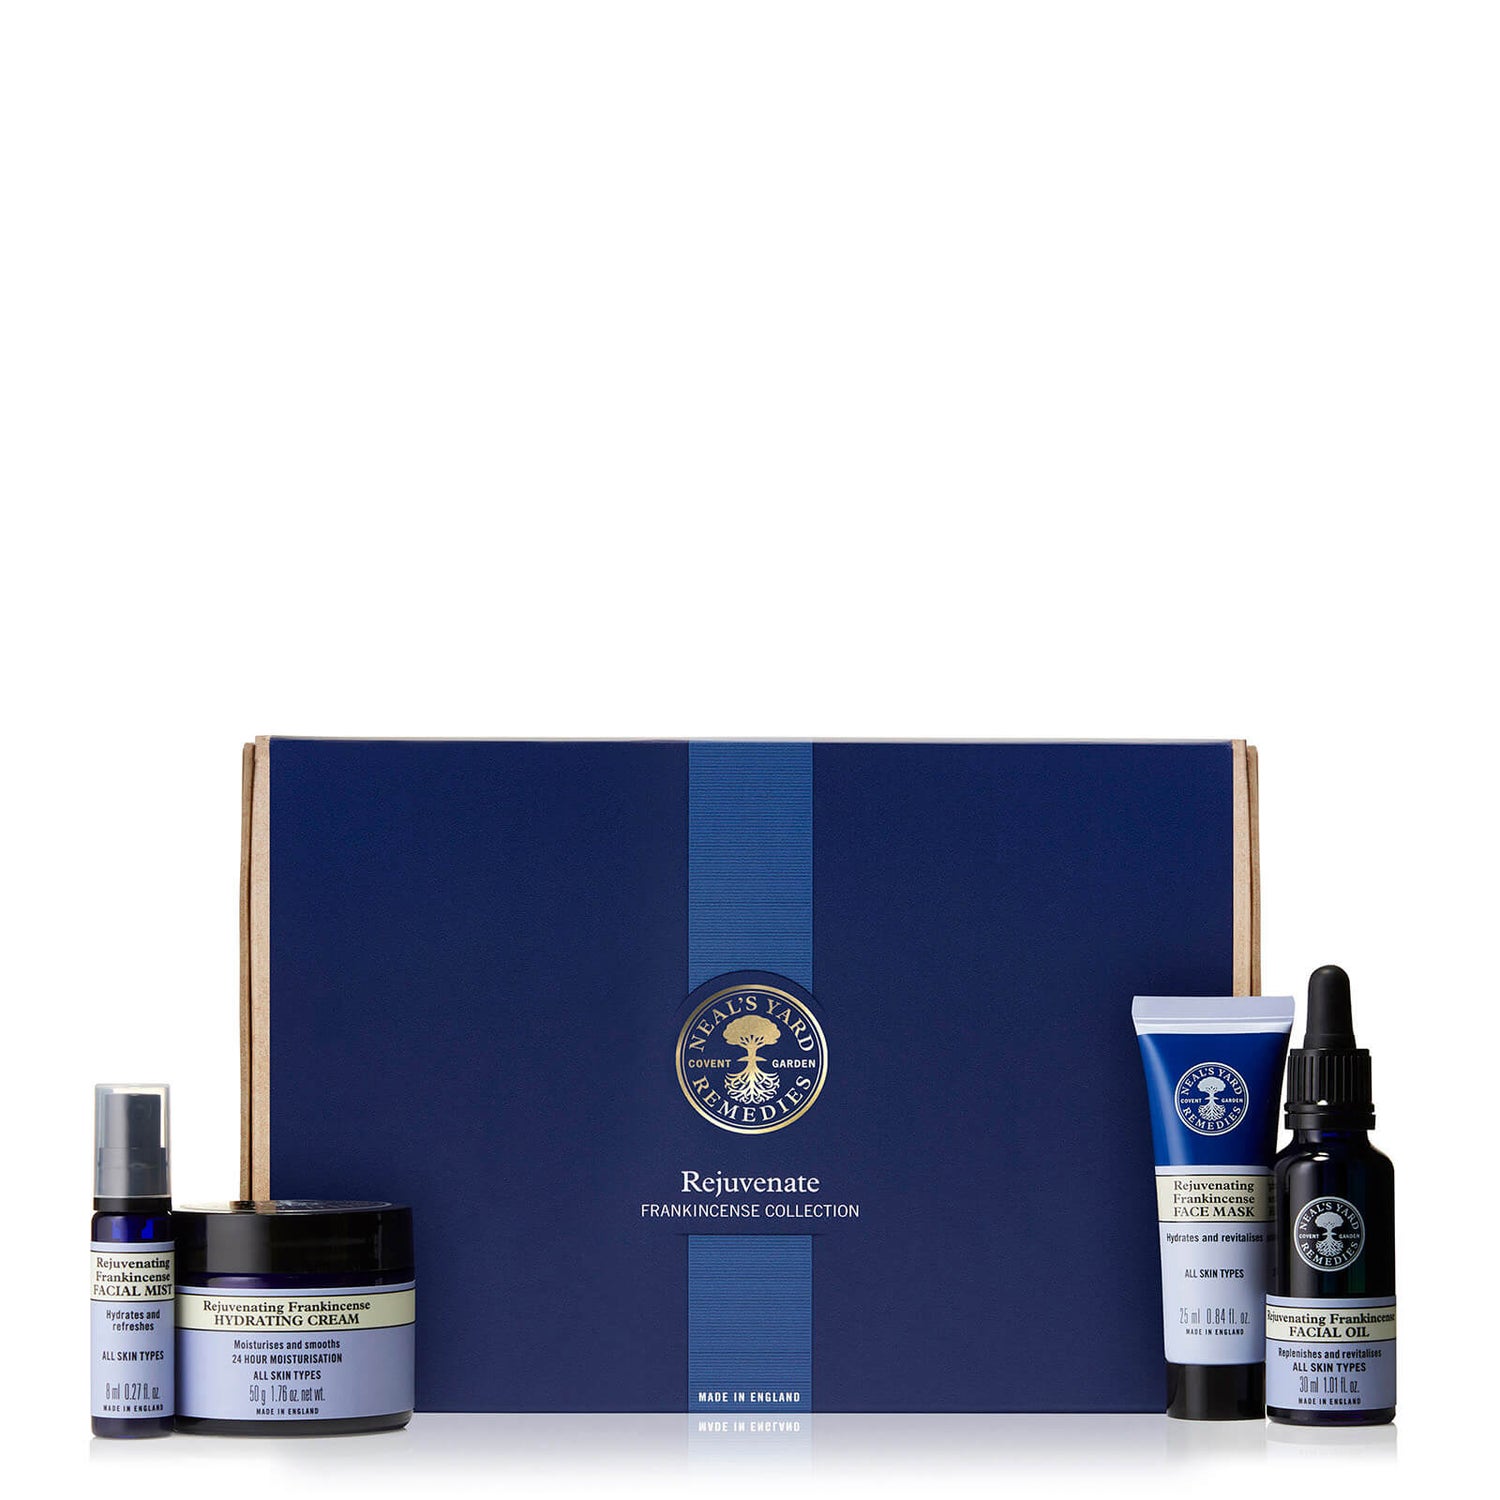 Neal's Yard Remedies Rejuvenate Your Beauty Frankincense Collection